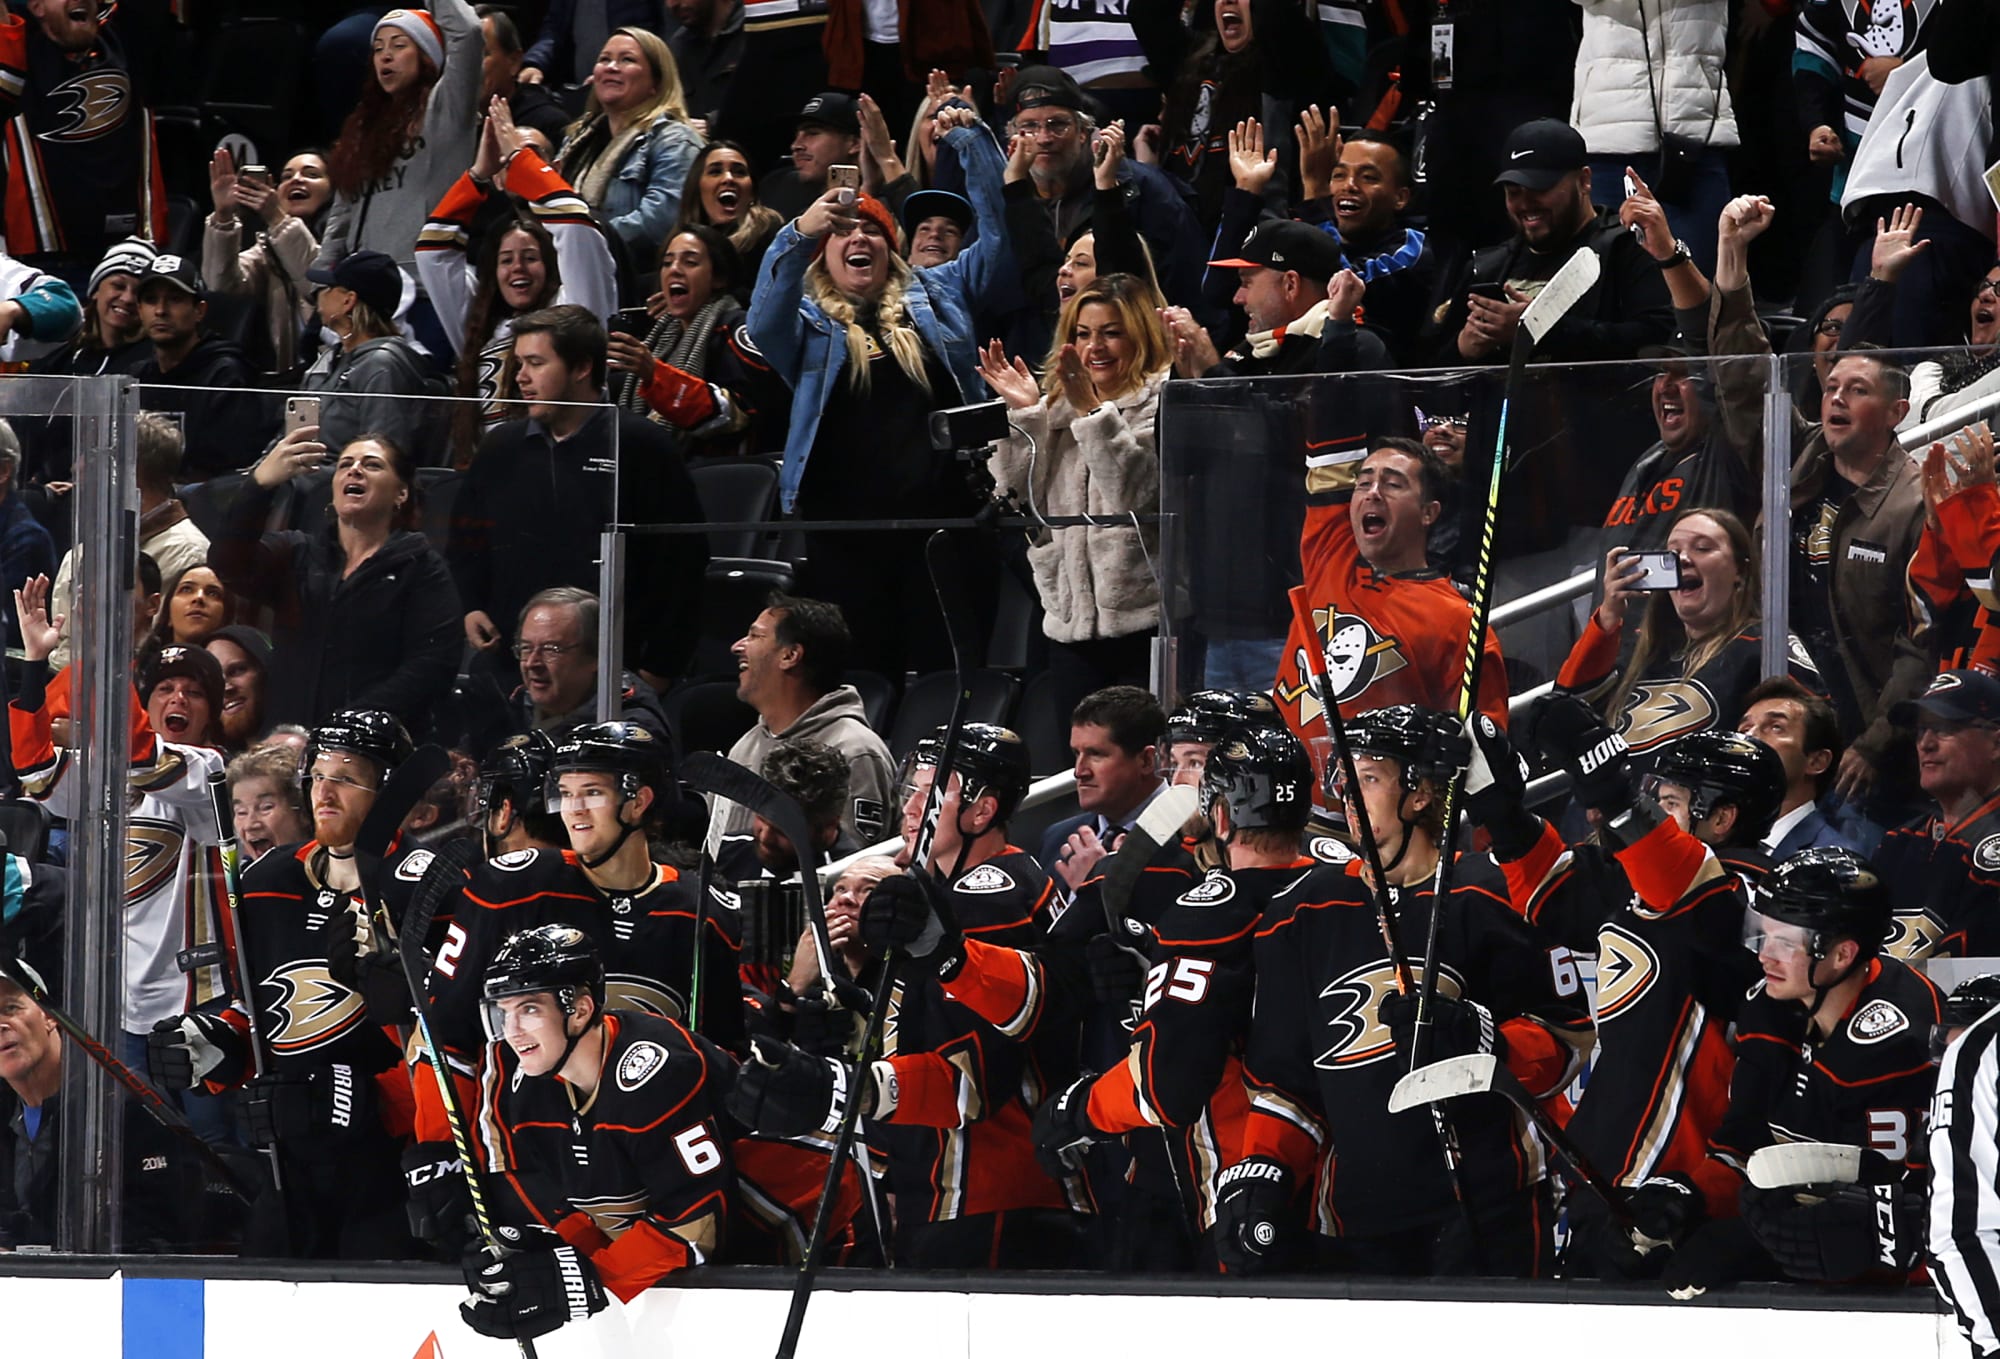 He's our jerk': In his return to Anaheim, Ducks fans explain why